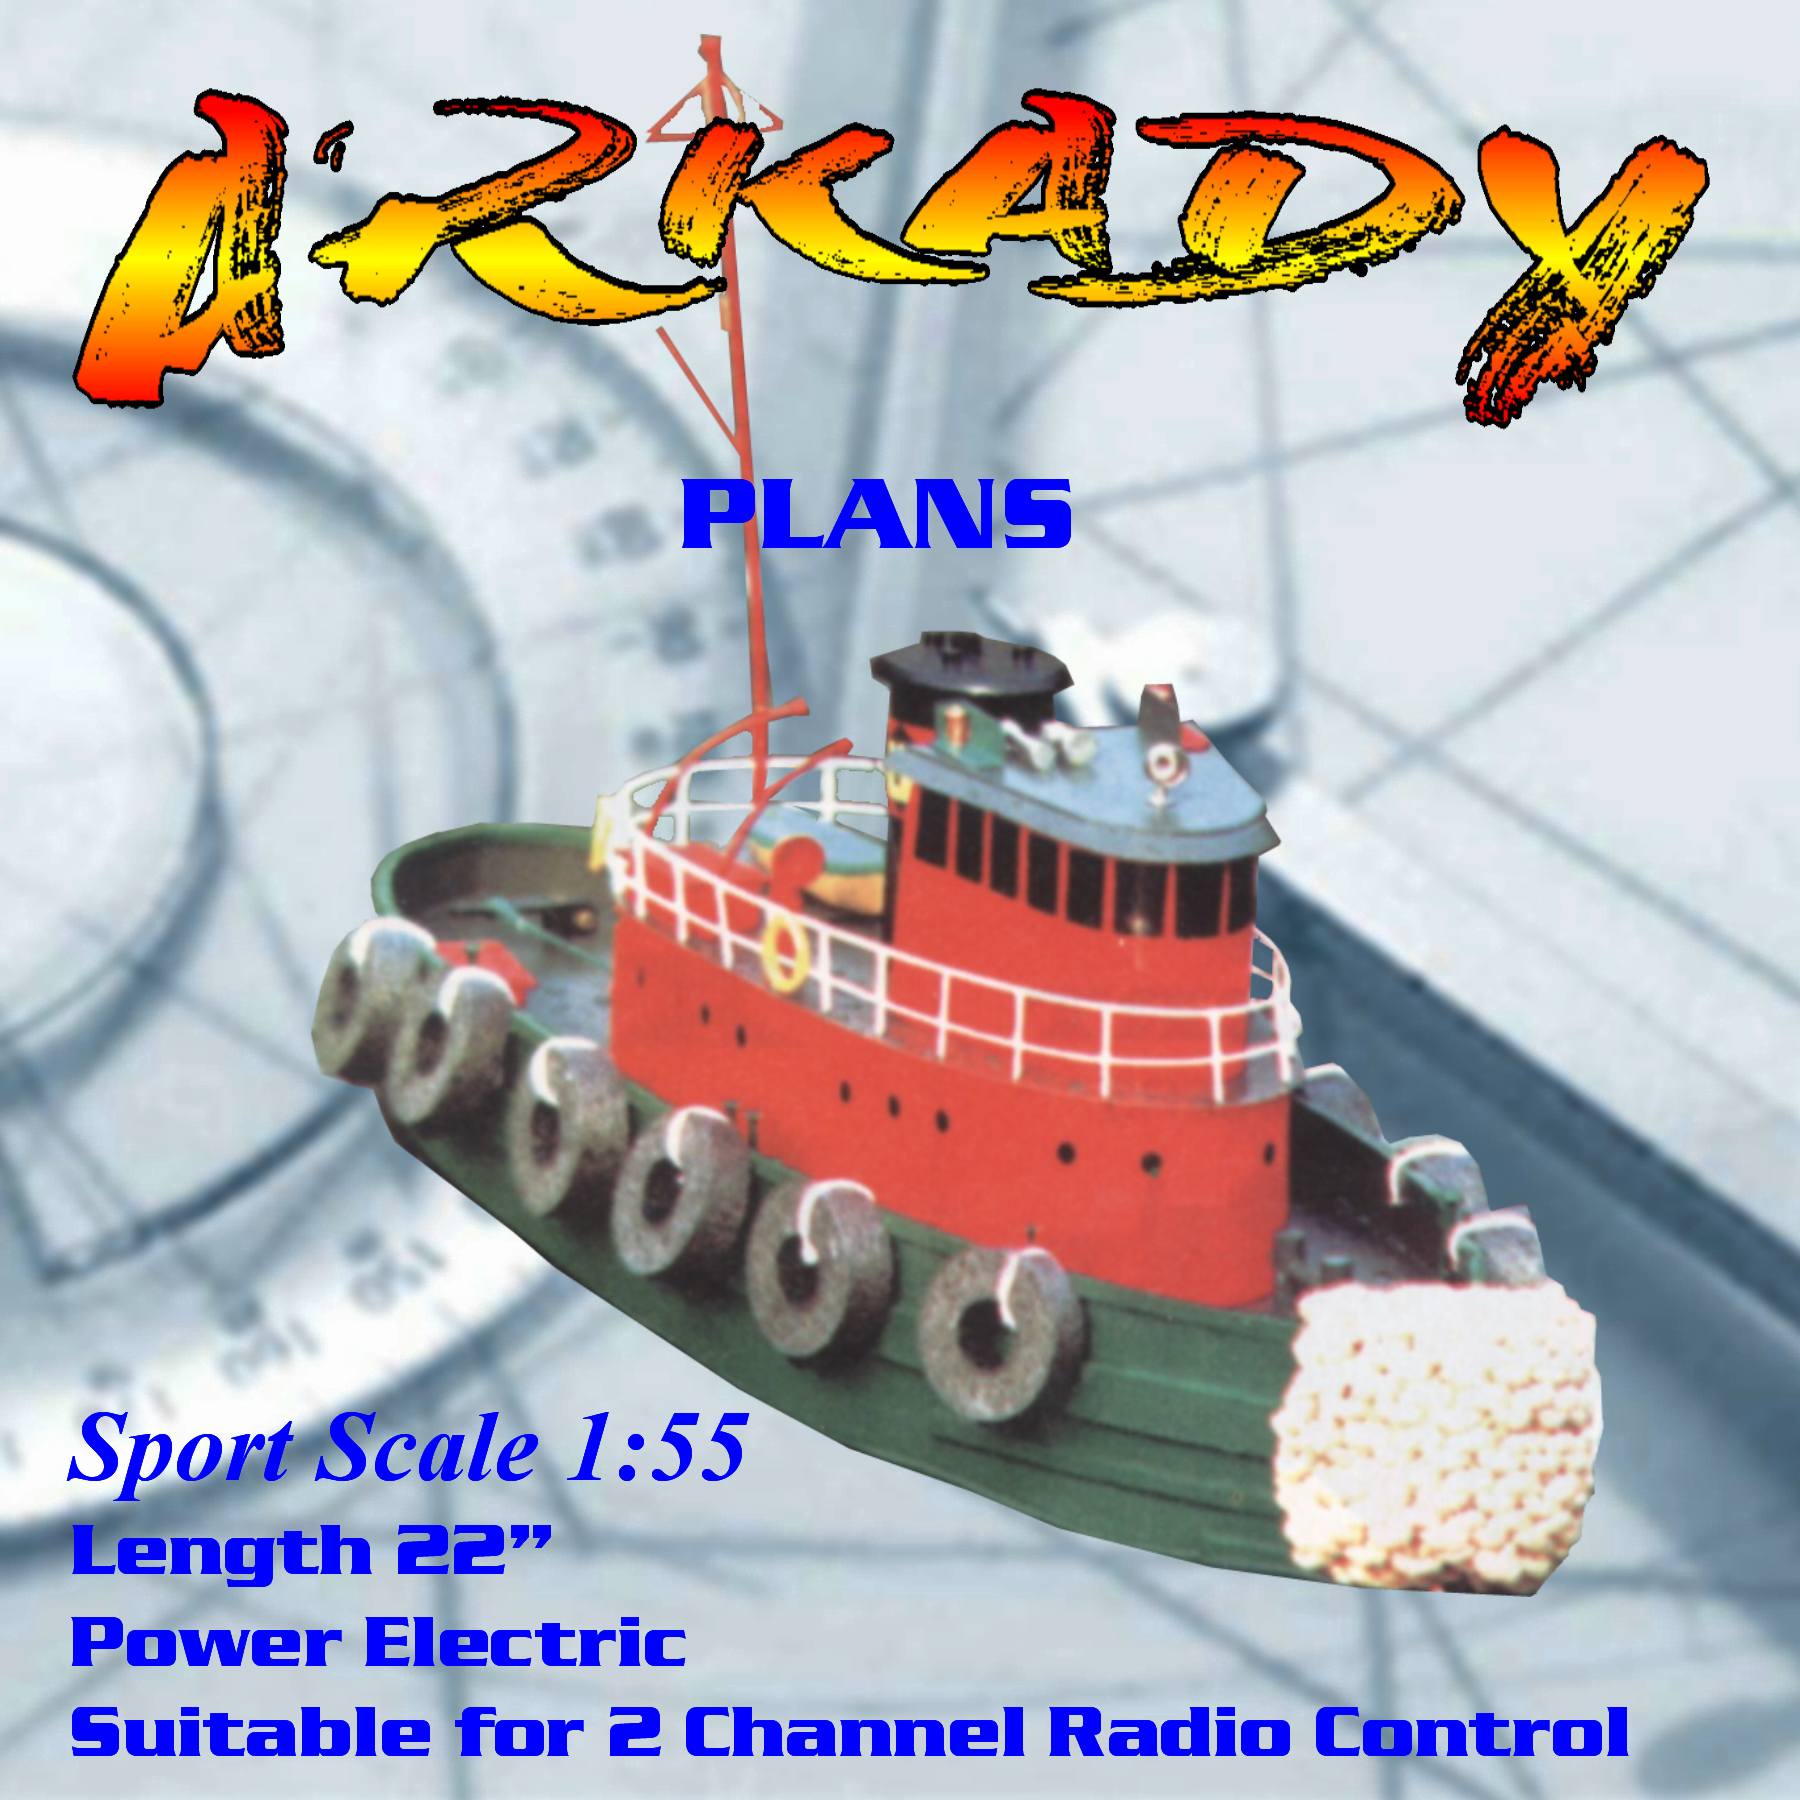 full size printed plan sports scale harbor tug length 22 " suitable for 2 channel radio control